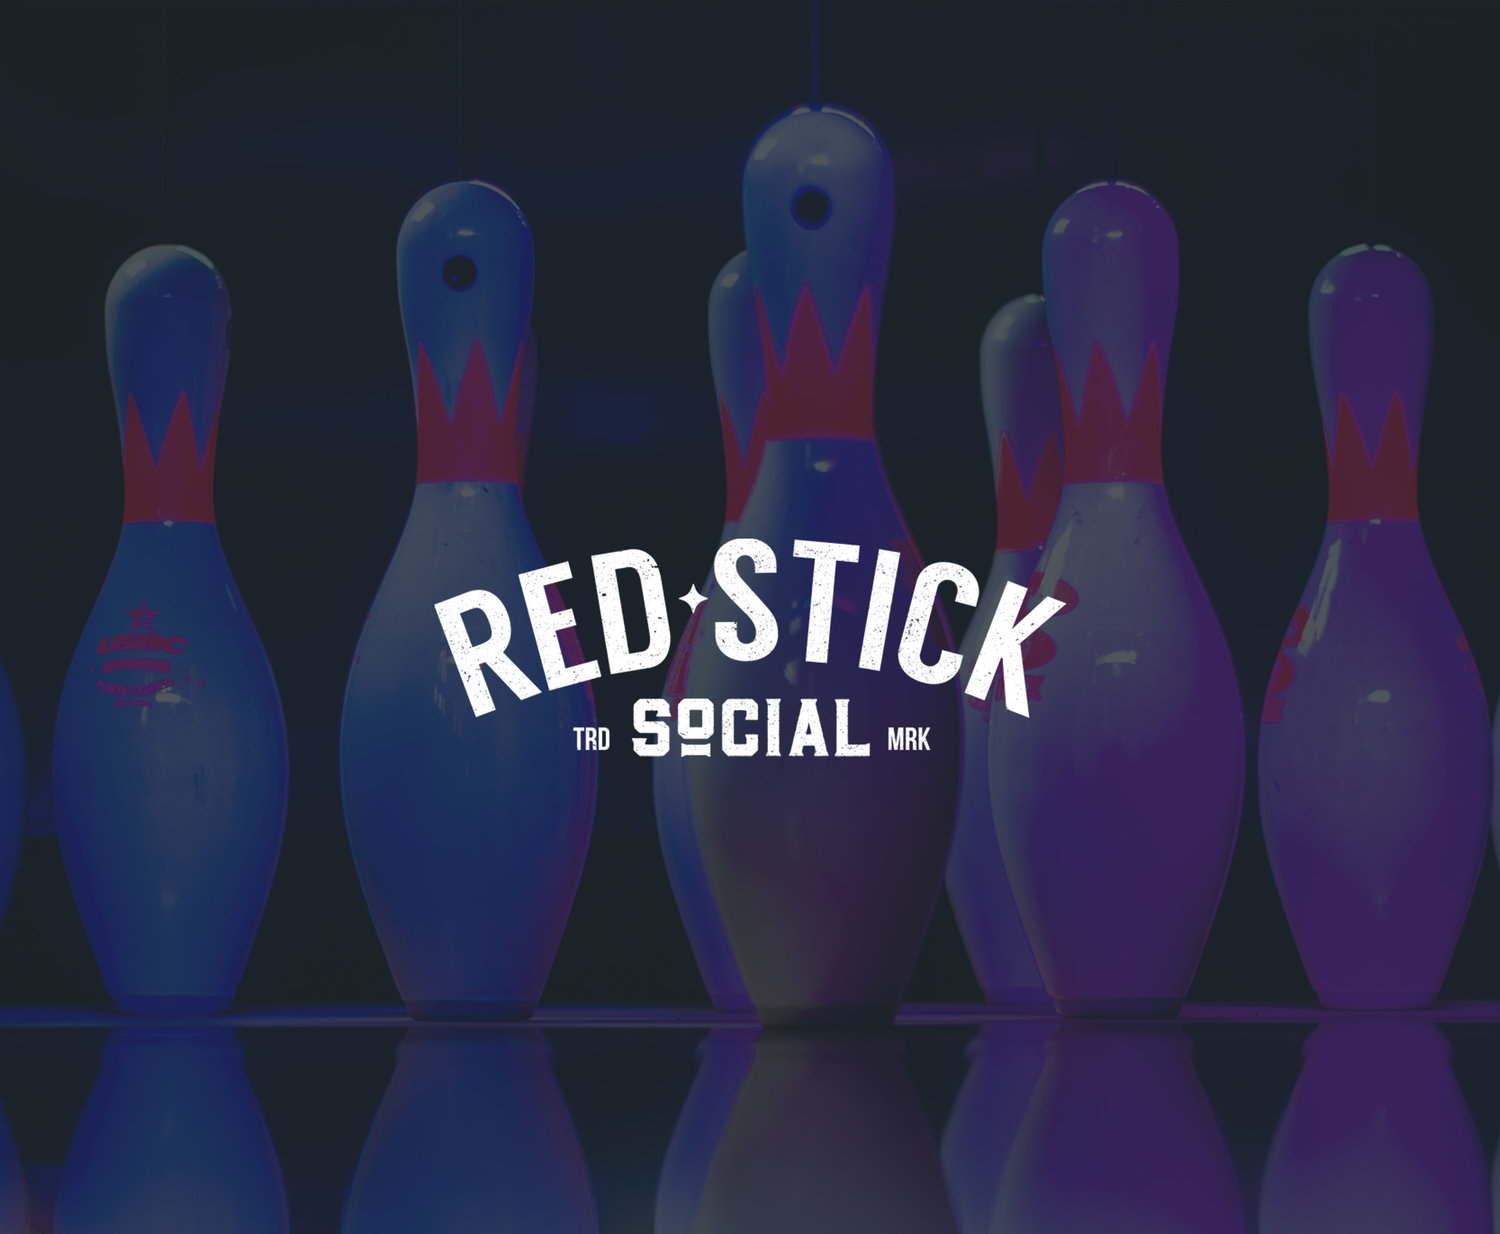 Holiday Party - Red Stick Social